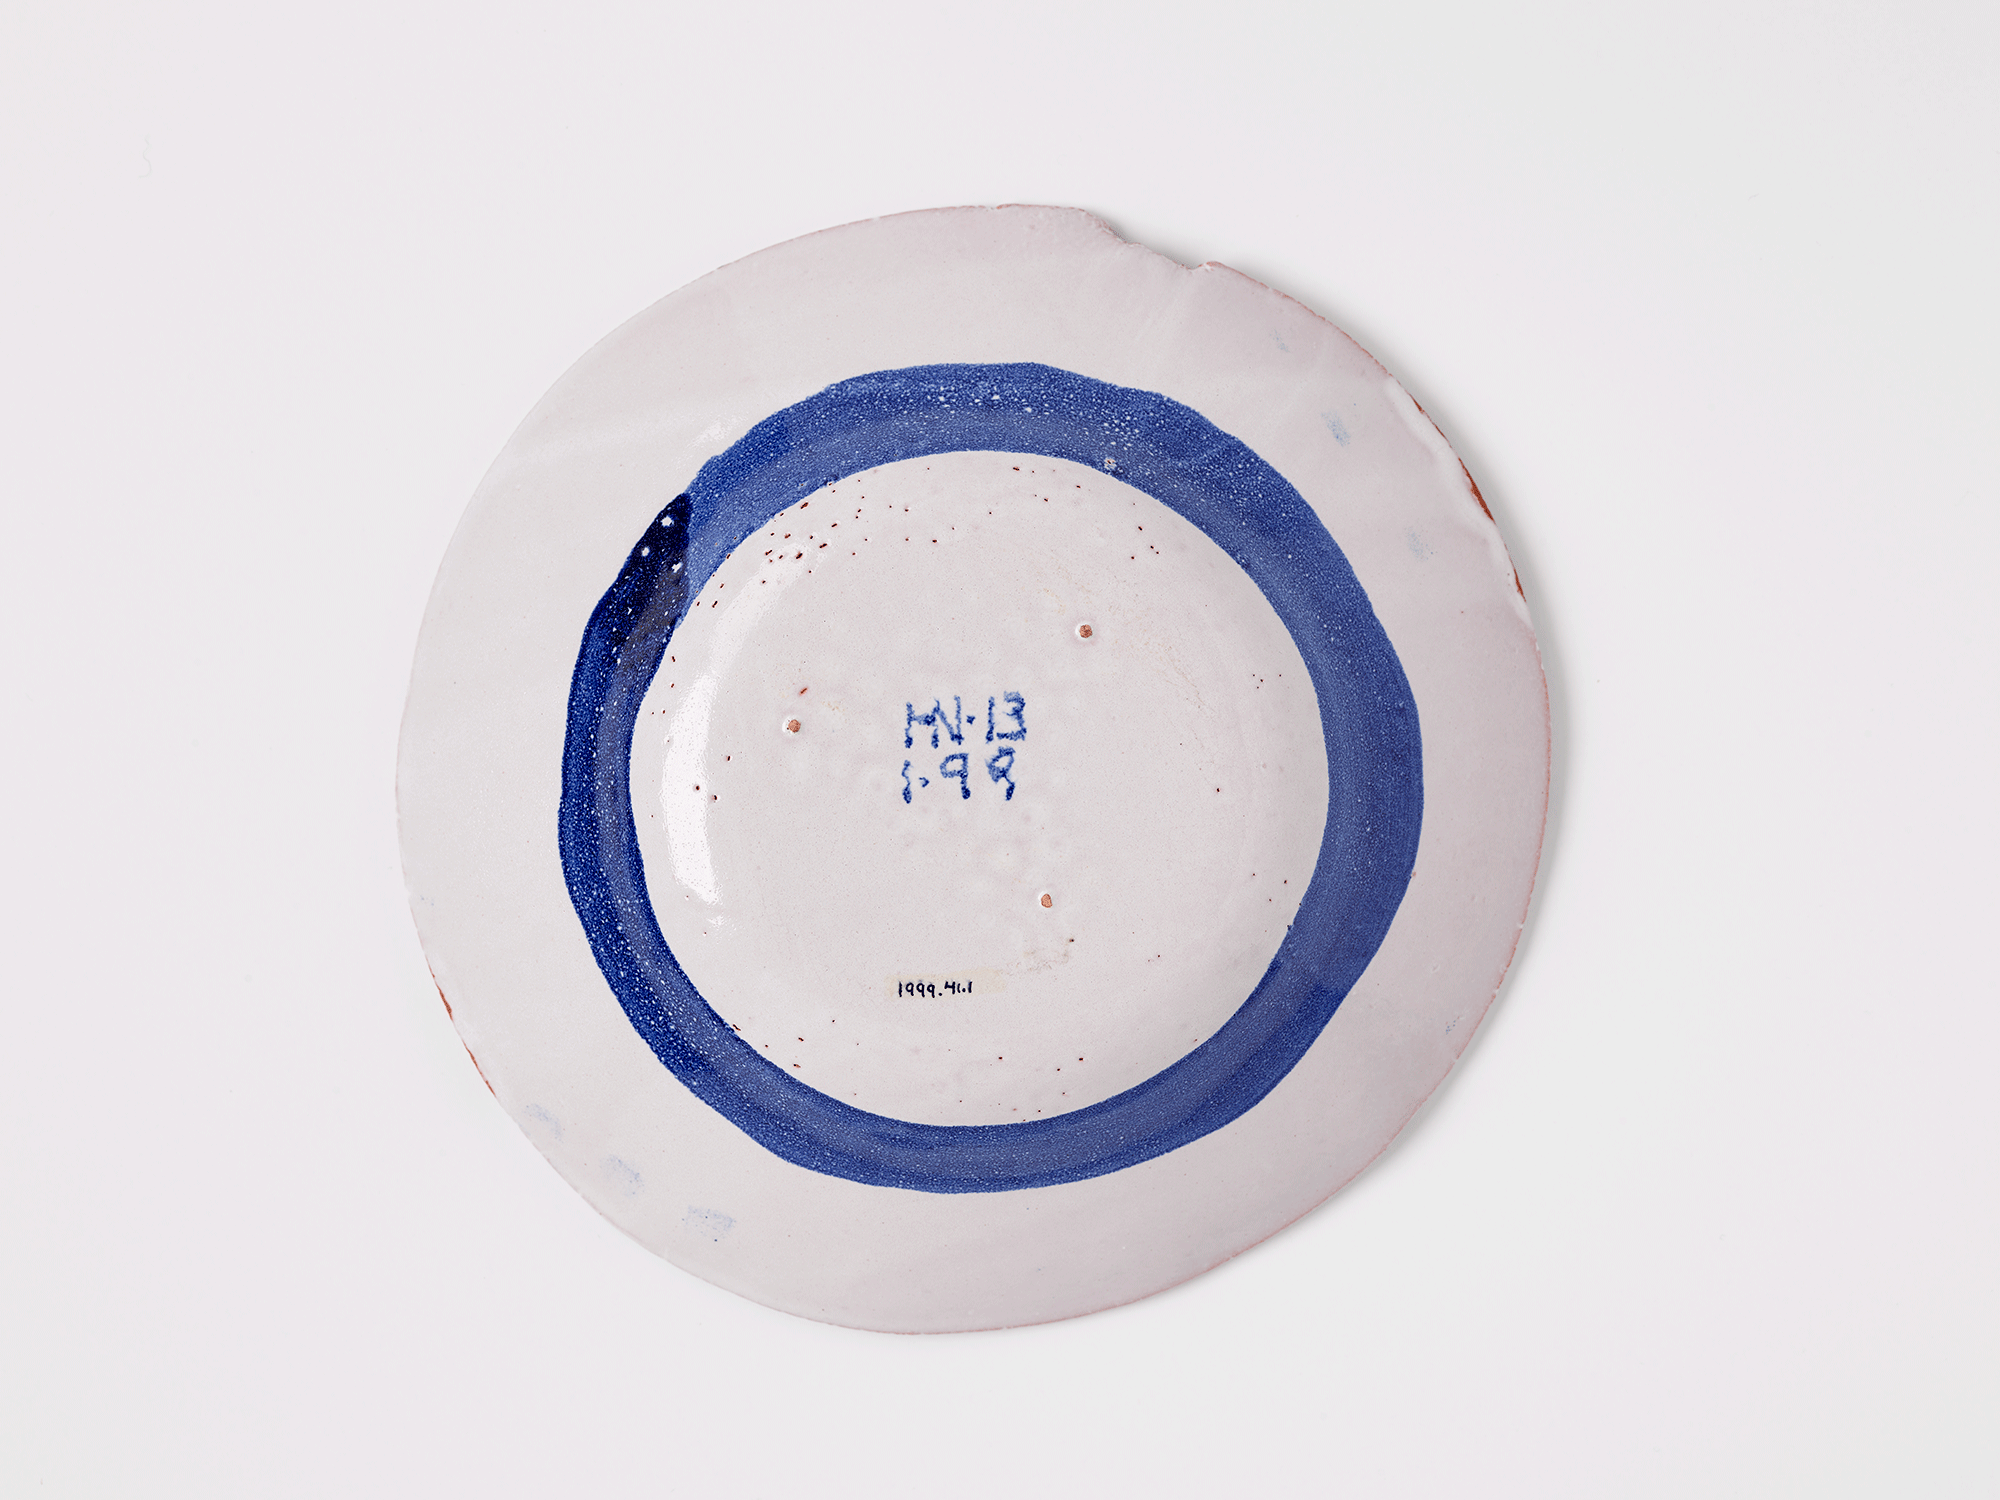 Underside of bowl. “HN 13 [,] 1 9 9” painted in blue on white. Accession number is visible.